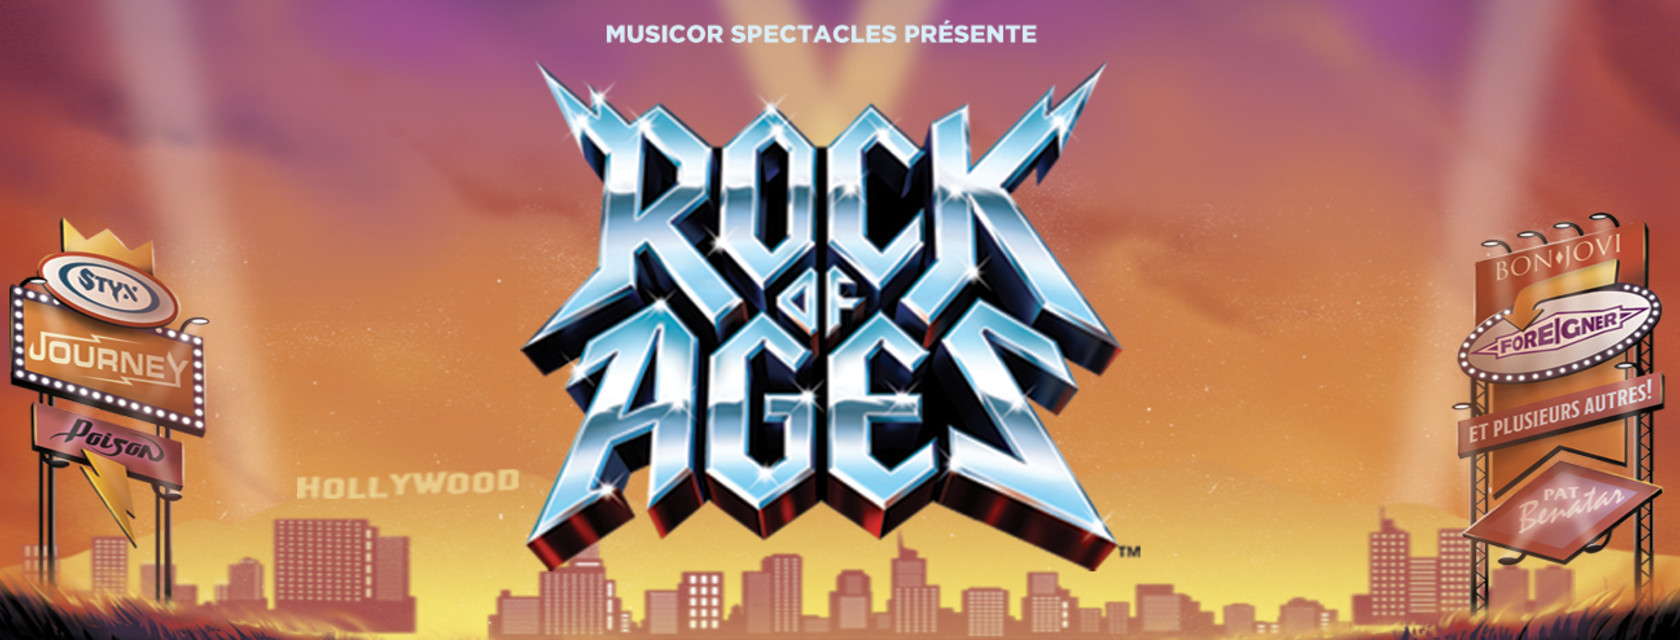 Rock of Ages: the new musical produced by Musicor Spectacles will be presented at the Cogeco Amphitheater this summer